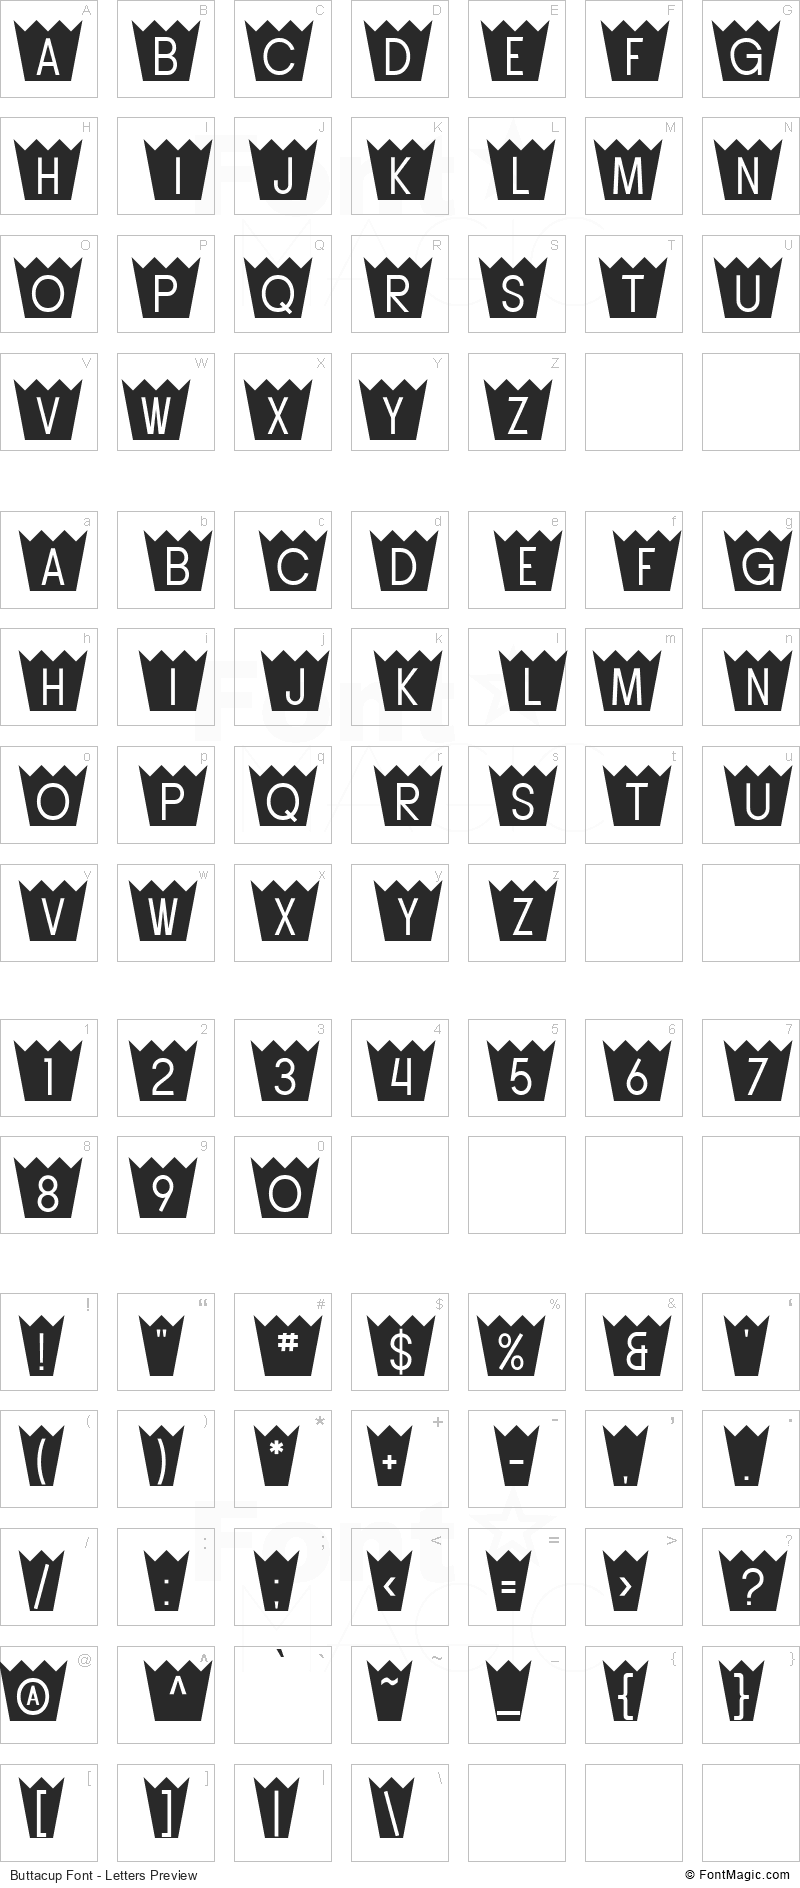 Buttacup Font - All Latters Preview Chart